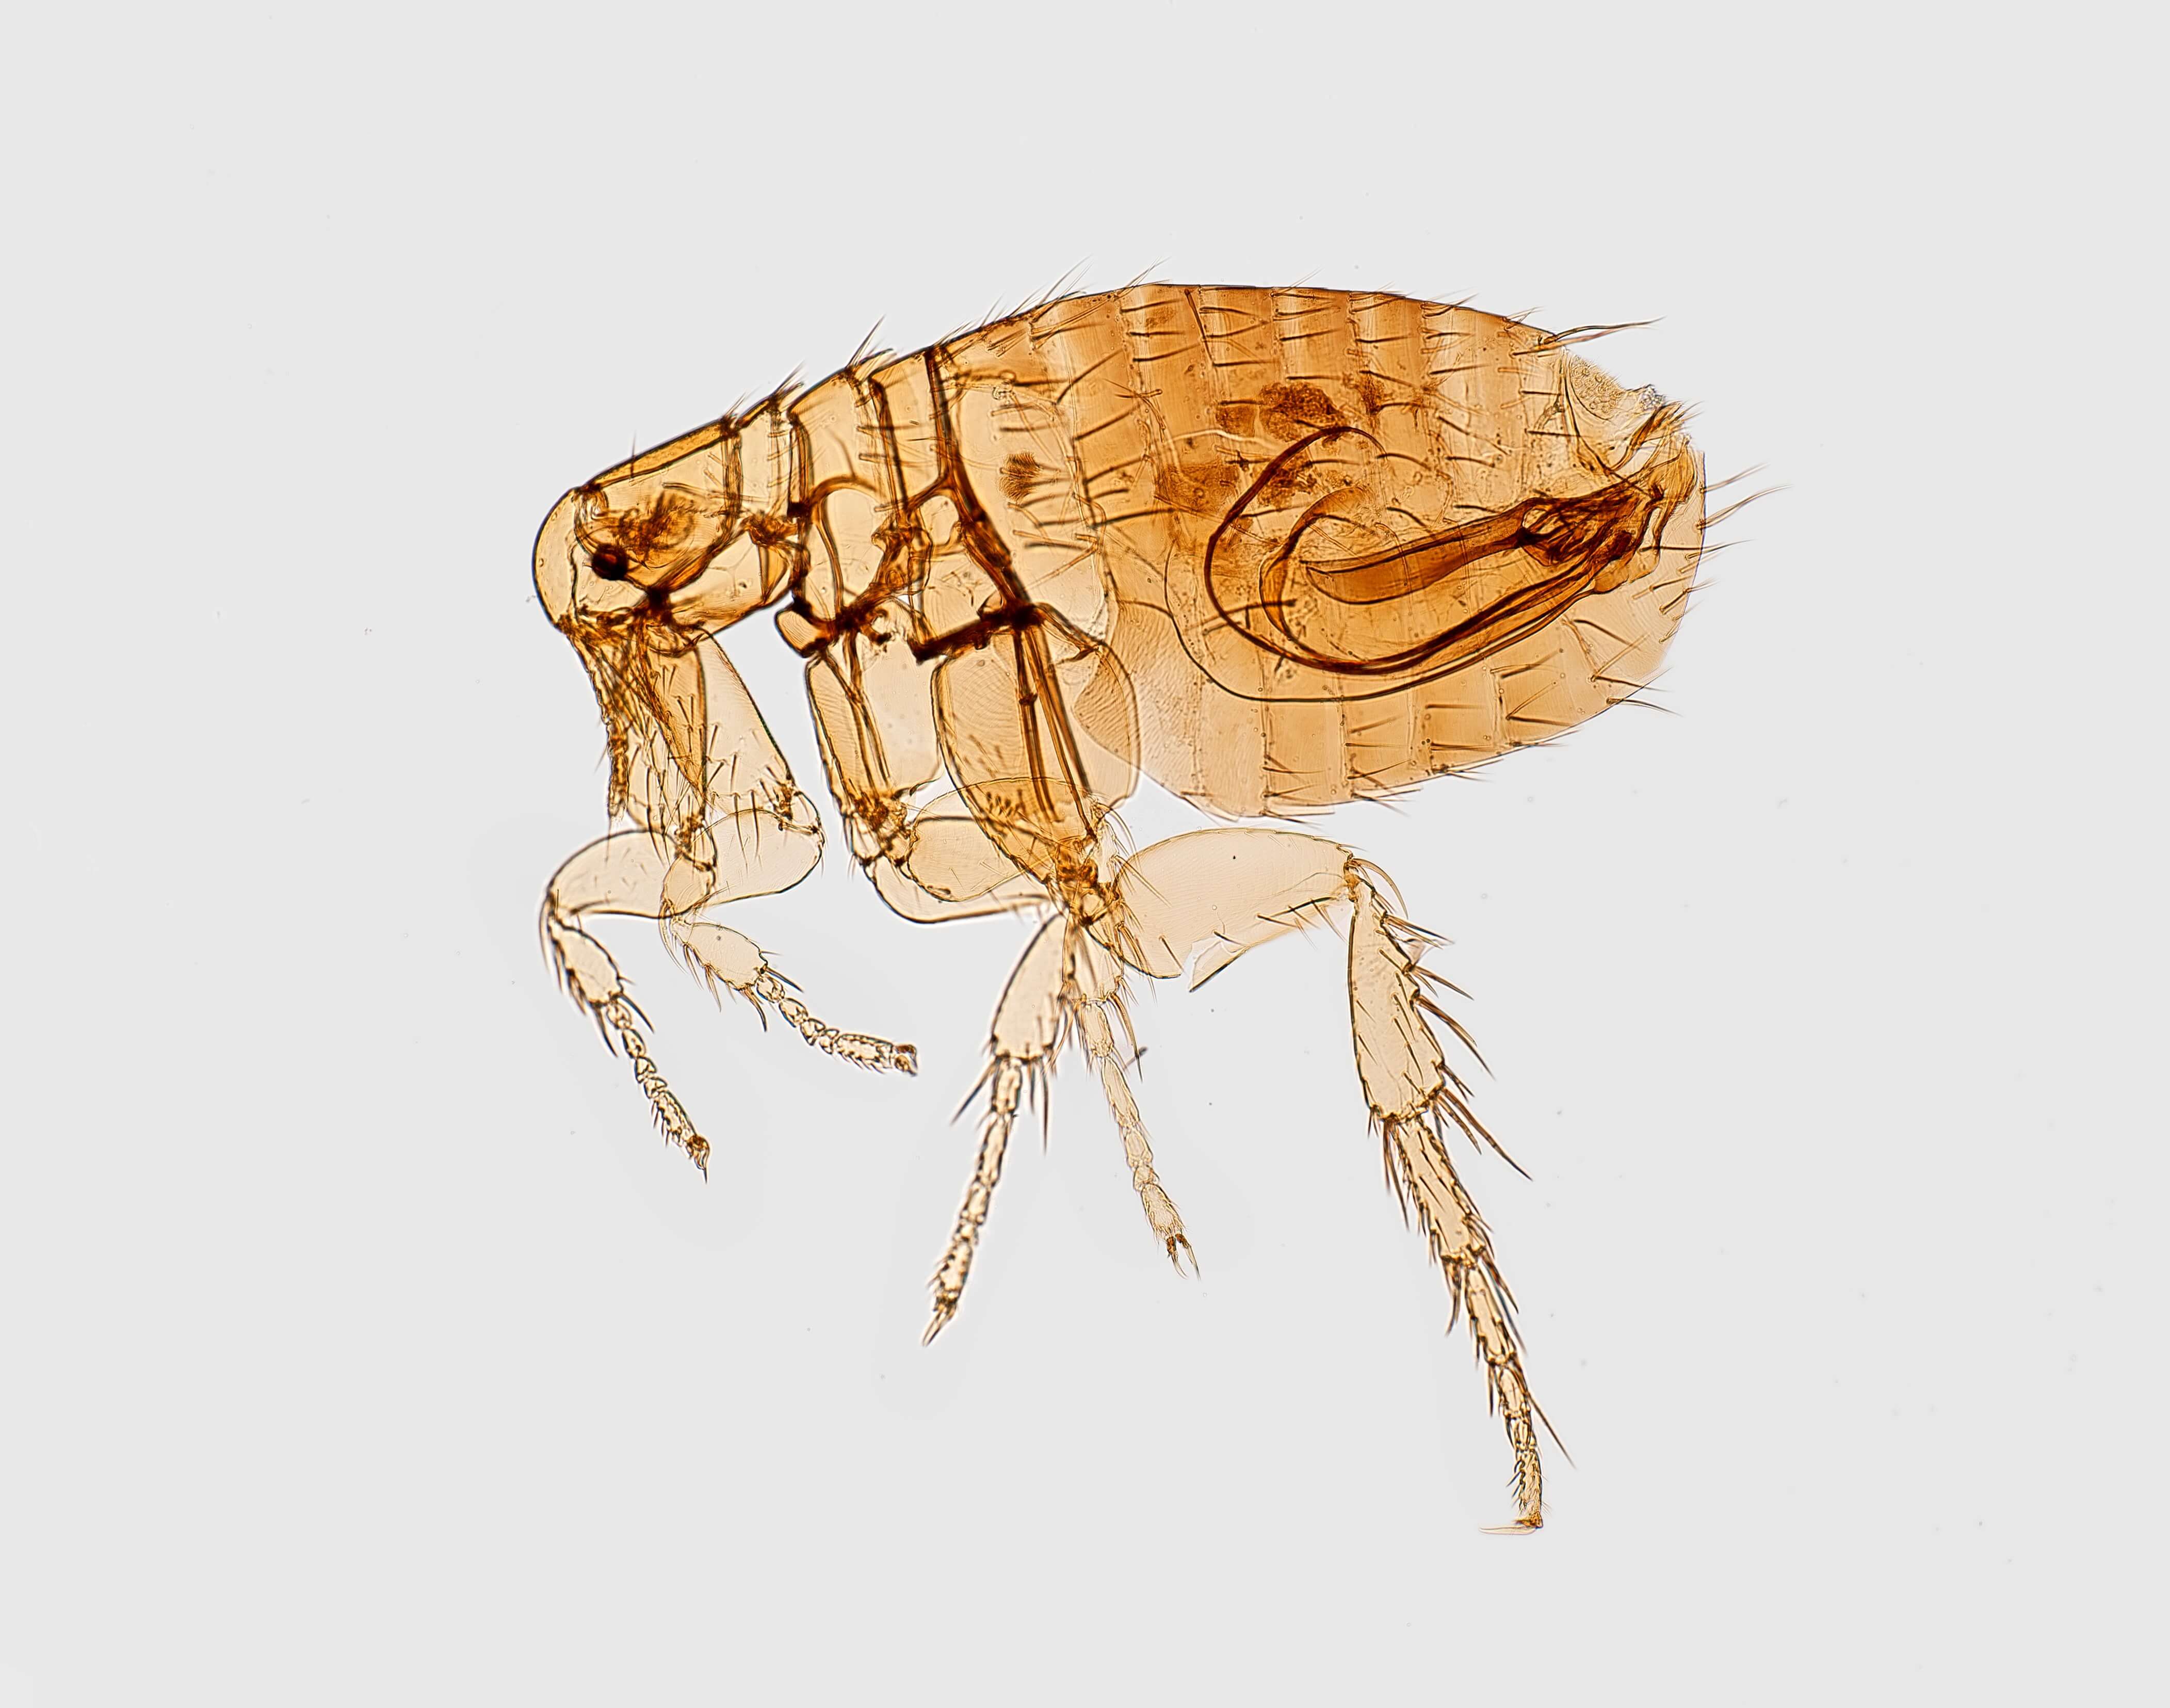 cat flea as seen under a microscope, Flea control treatment carried out